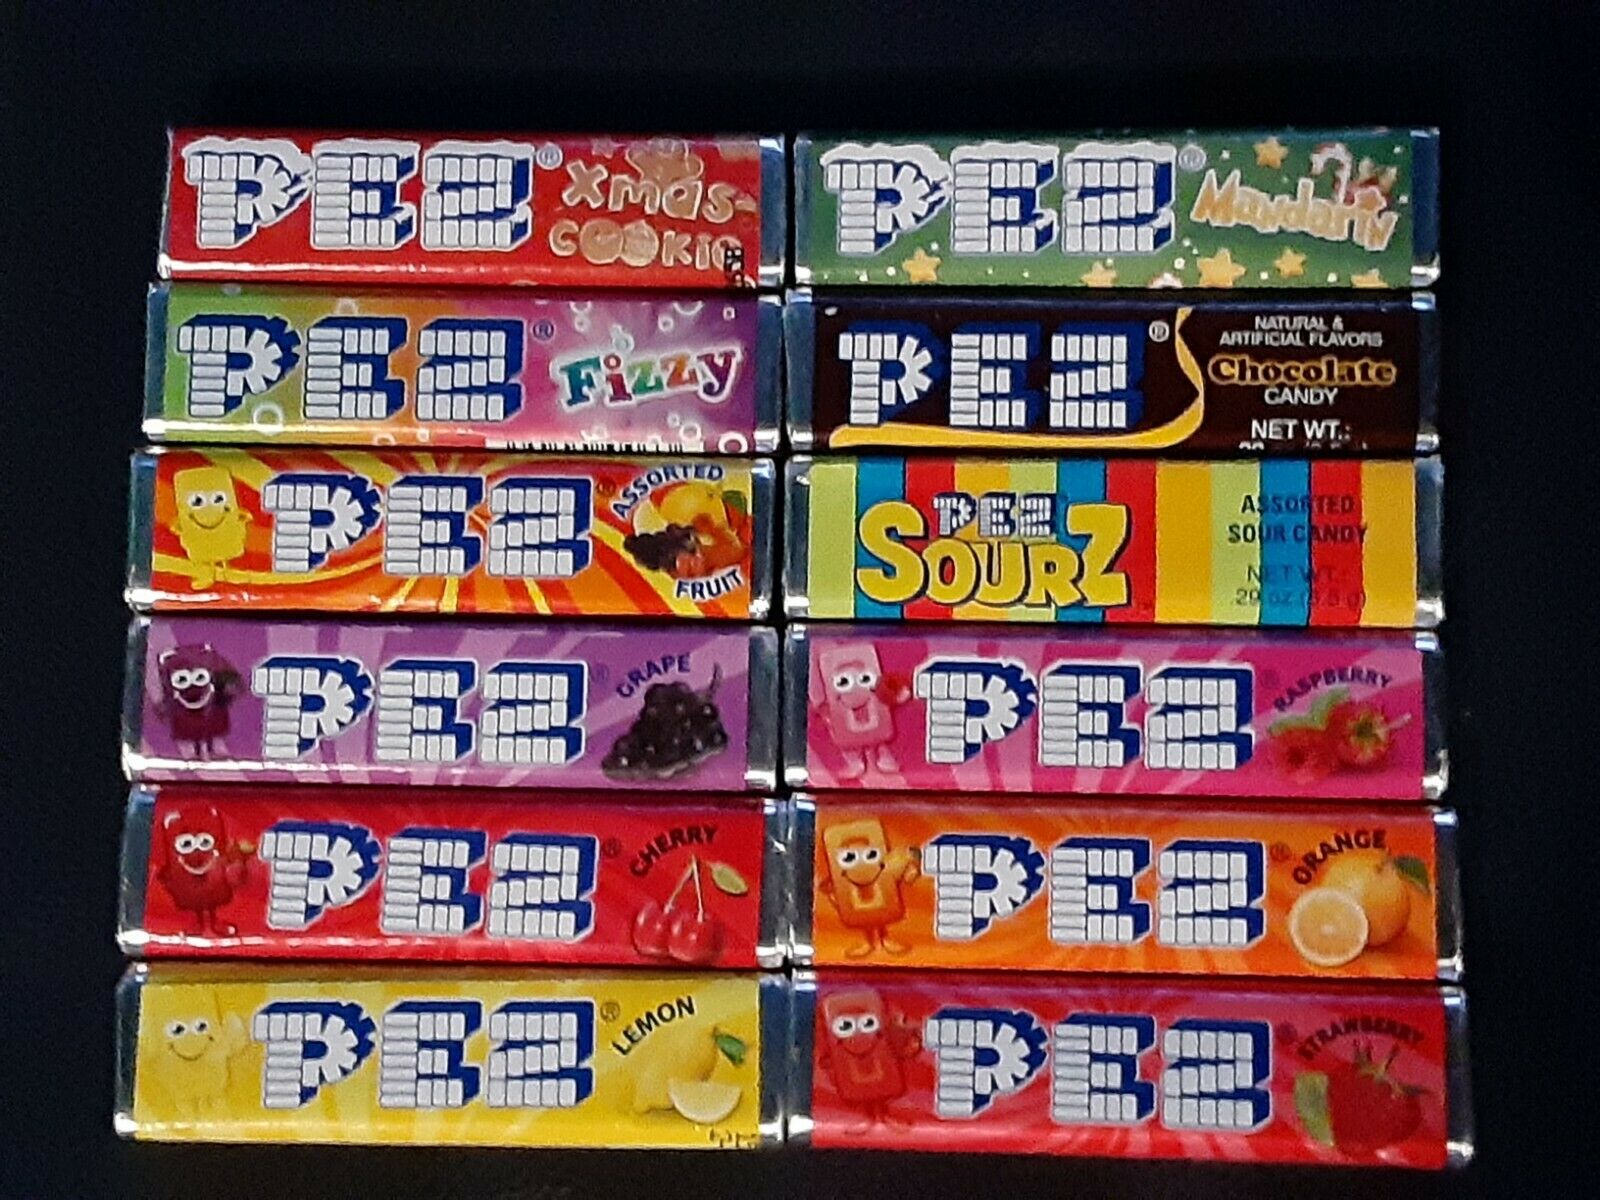 12 Packs Pez Candy Refill- Hard To Find Flavors + Rare Xmas Cookies & Mandarin